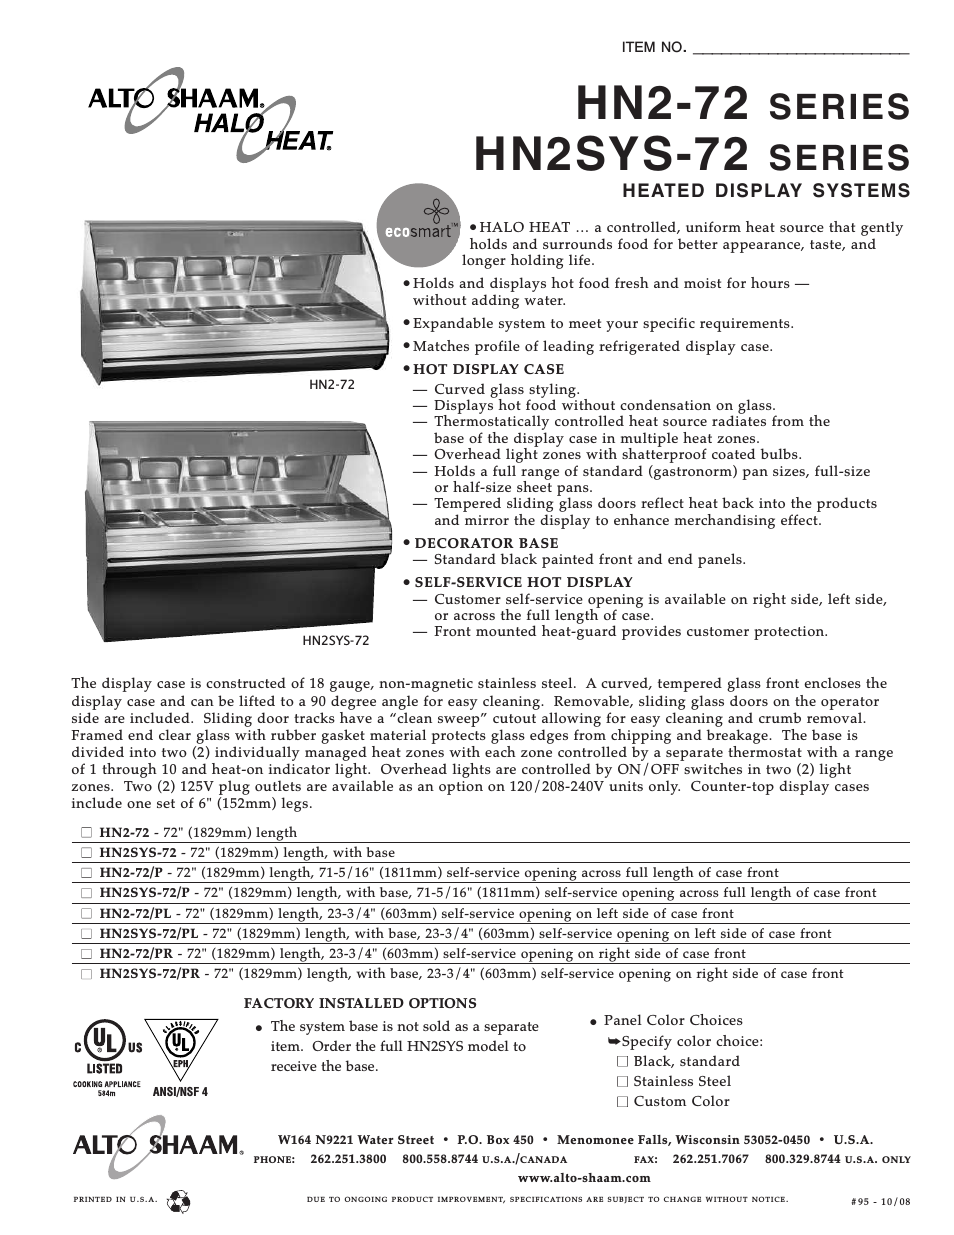 HN2SYS-72